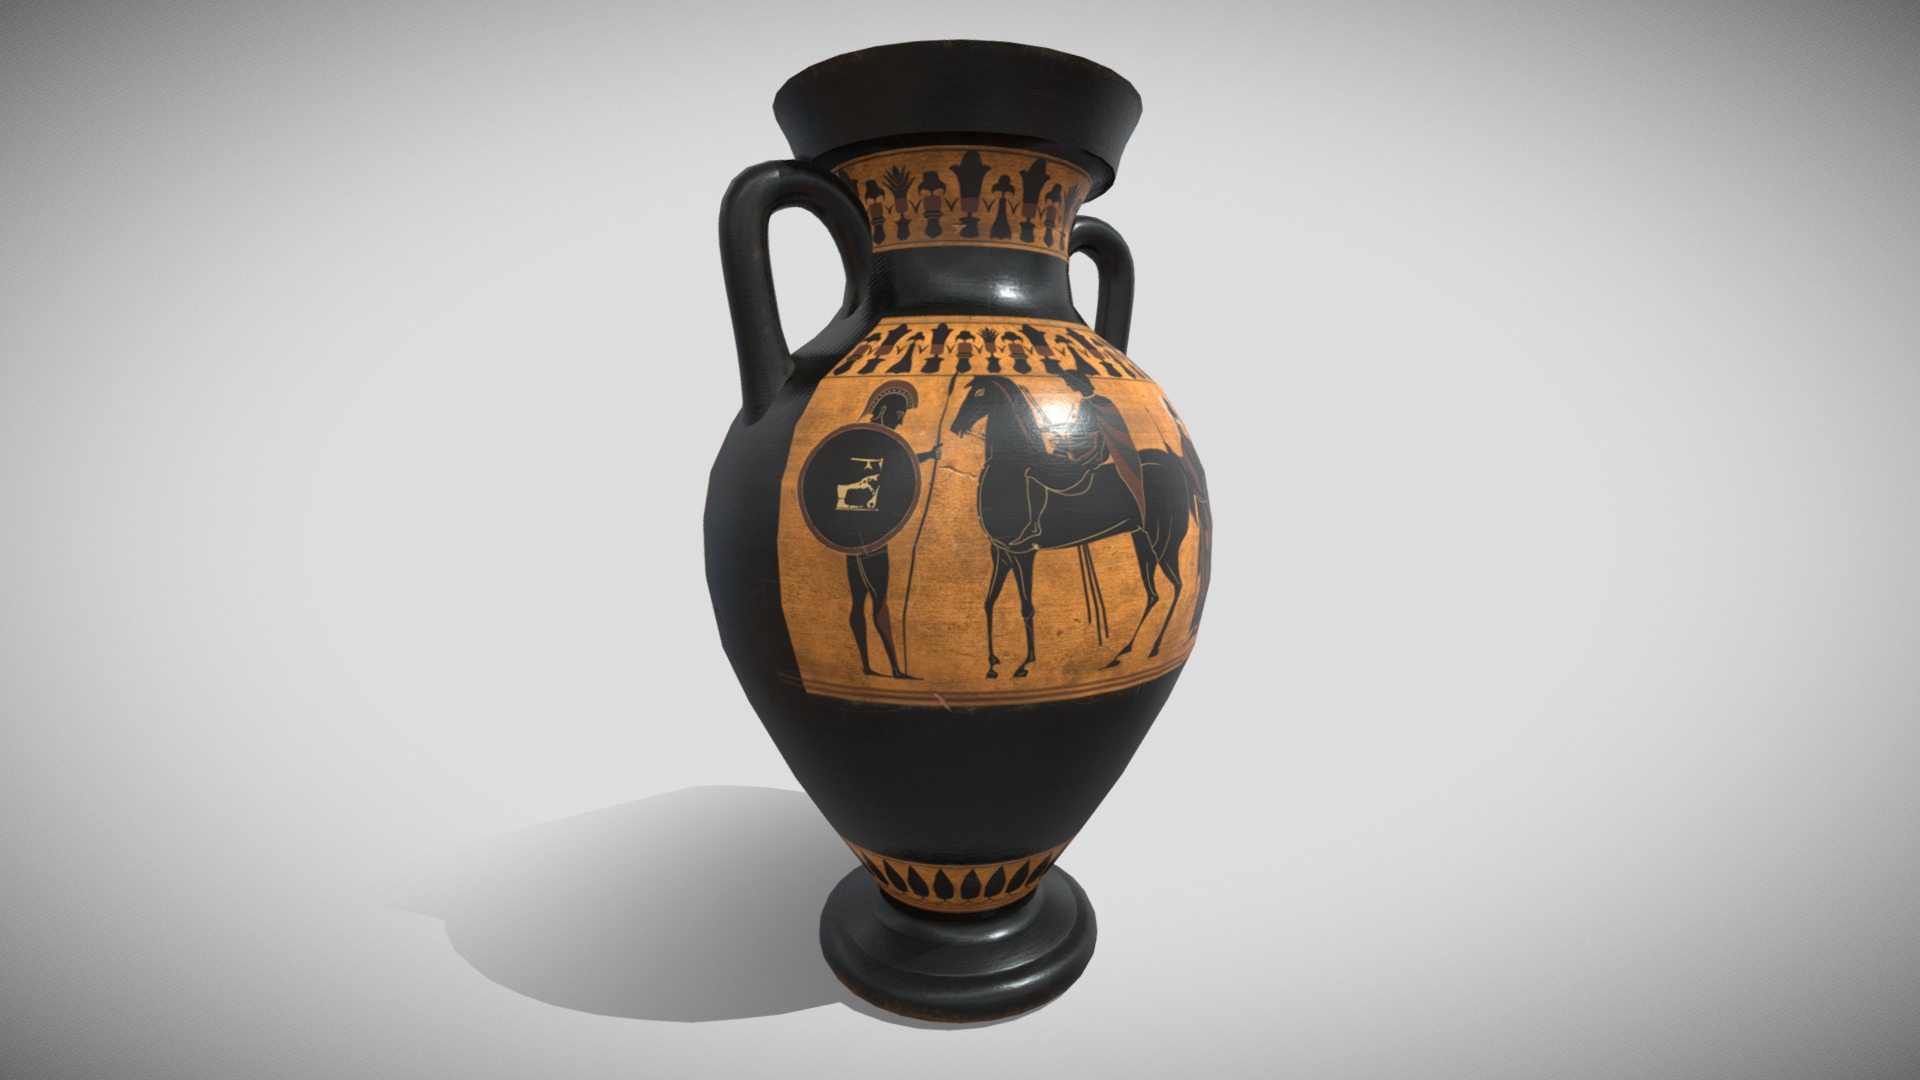 3D model Black-figure pottery #2 - This is a 3D model of the Black-figure pottery #2. The 3D model is about a black and gold vase.